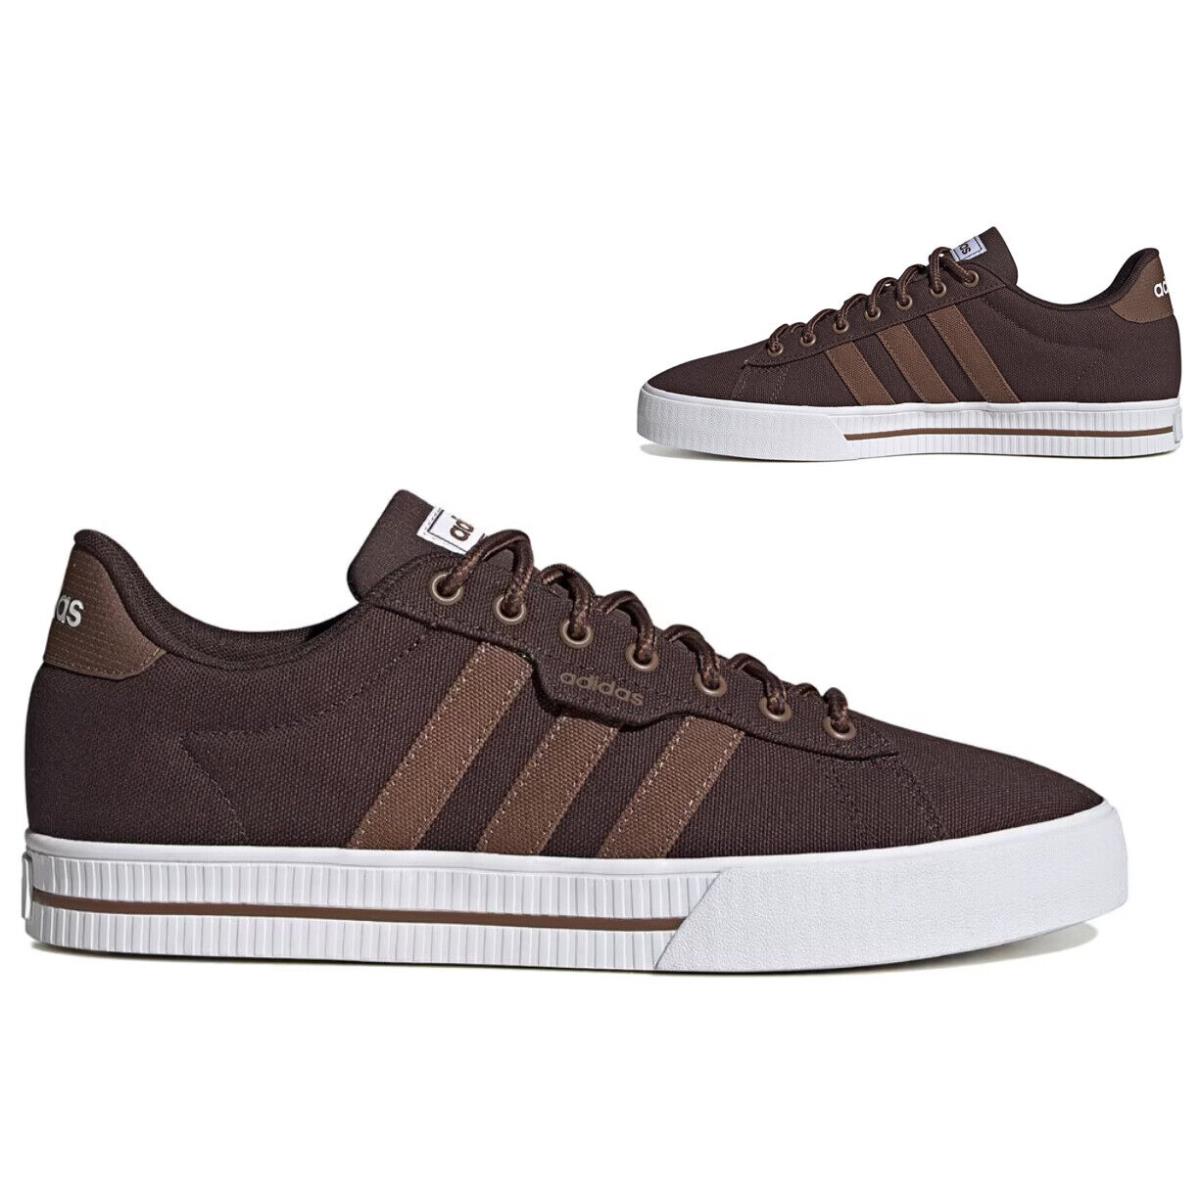 Adidas Daily 3.0 Athletic Sneaker Casual Shoes Mens Brown White All Sizes